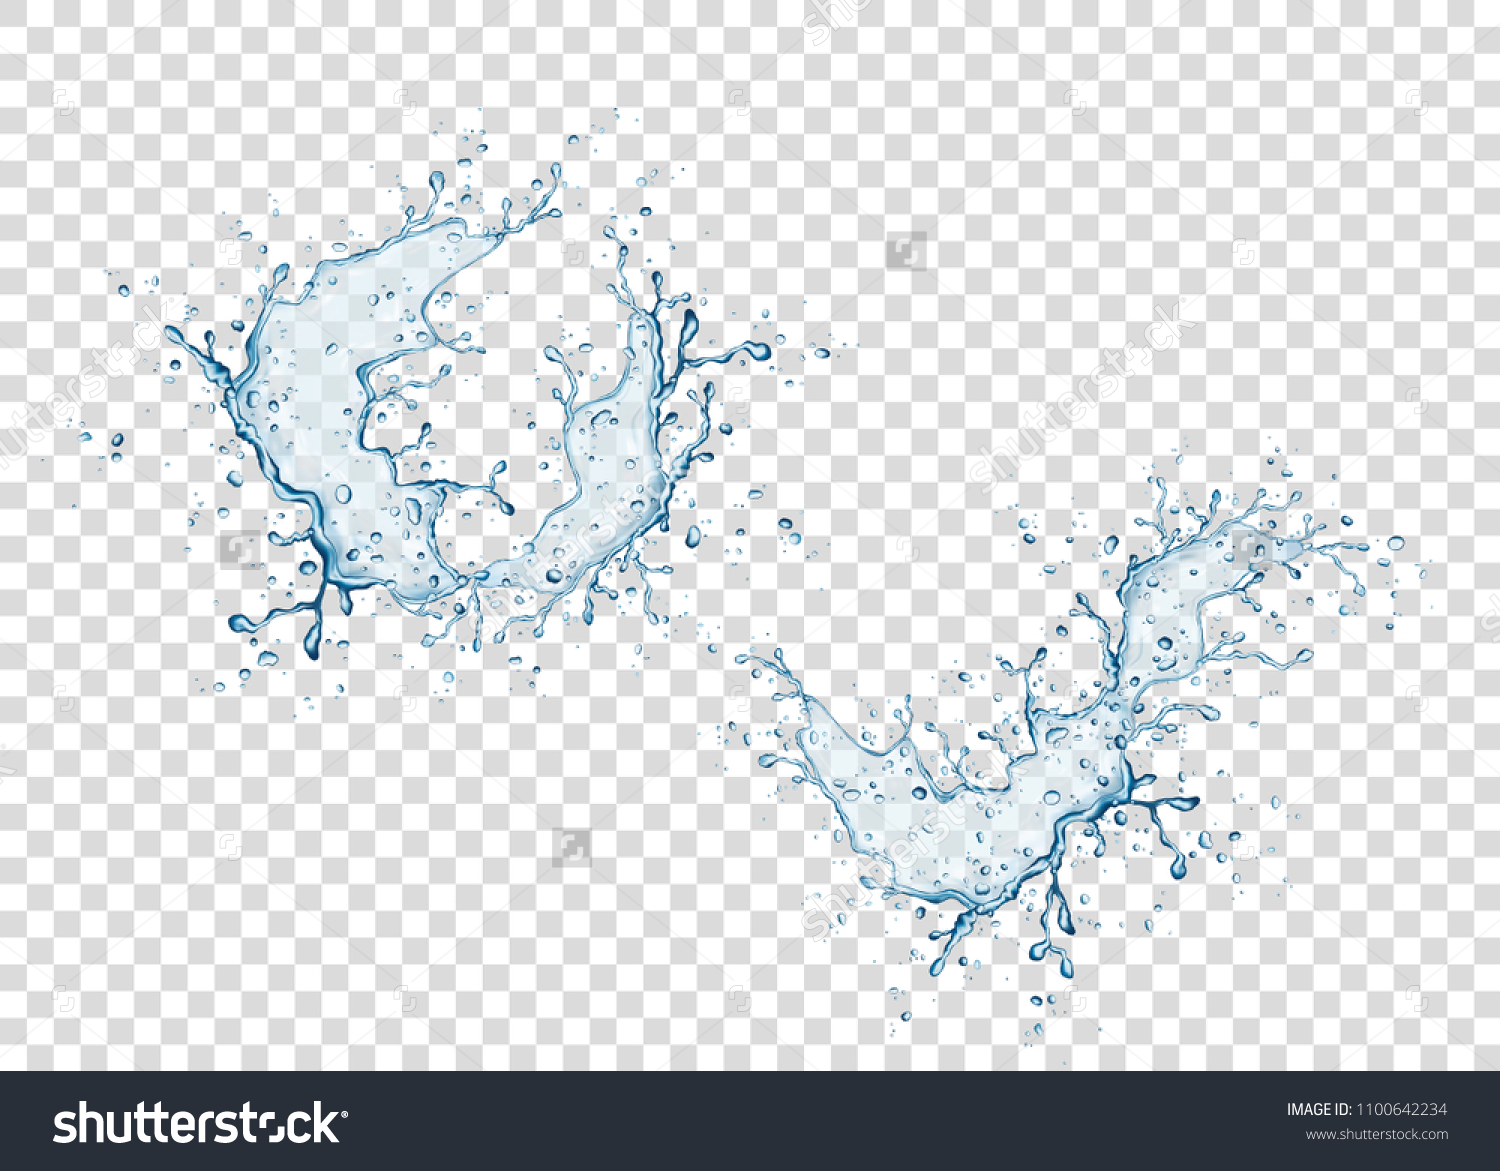 Water splash and drops isolated on transparent background. Vector texture. #1100642234